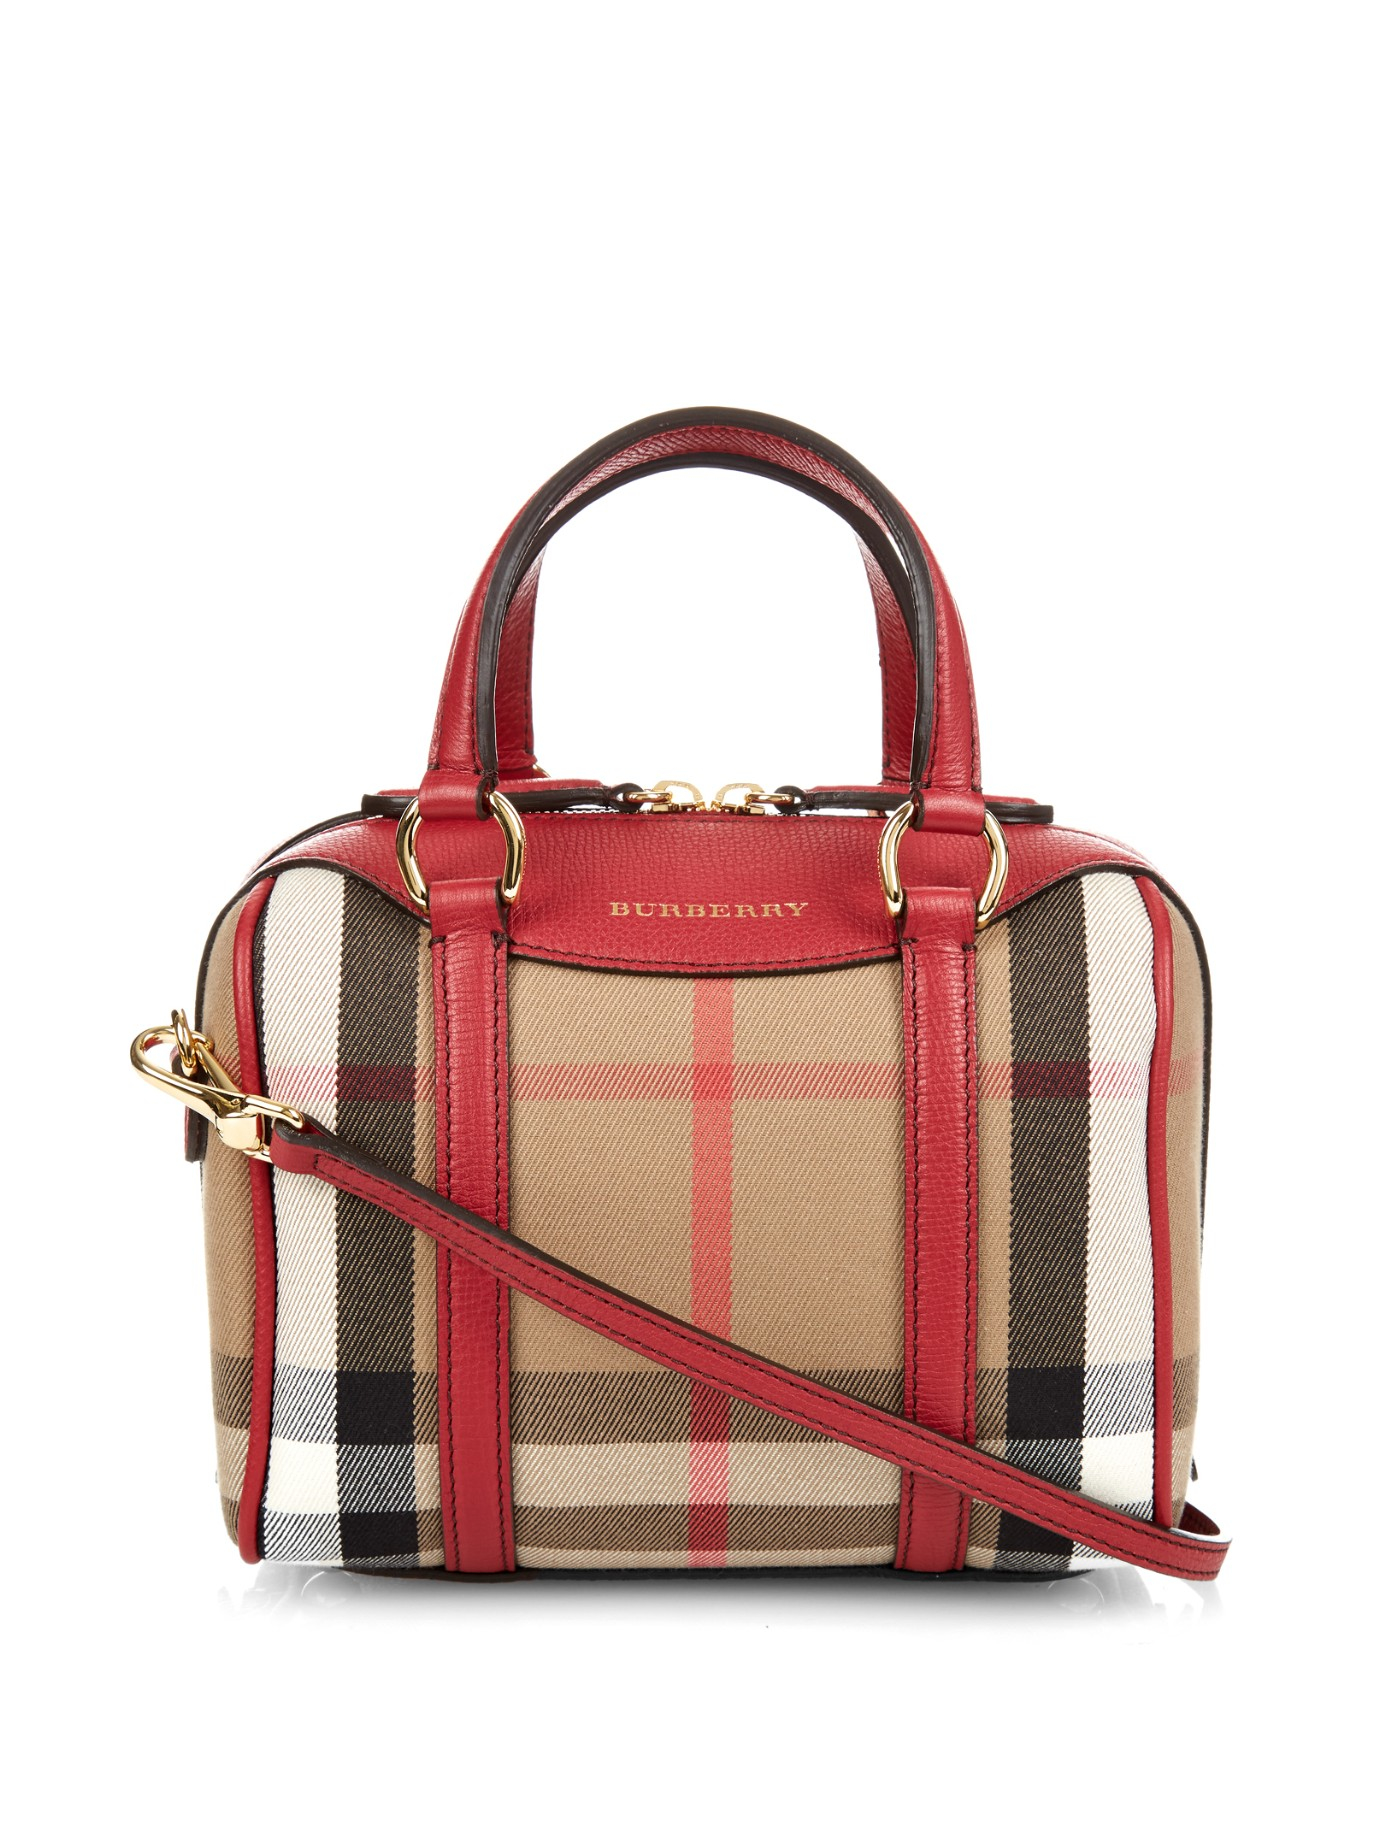 Lyst - Burberry Small Alchester Cross-Body Bag in Red